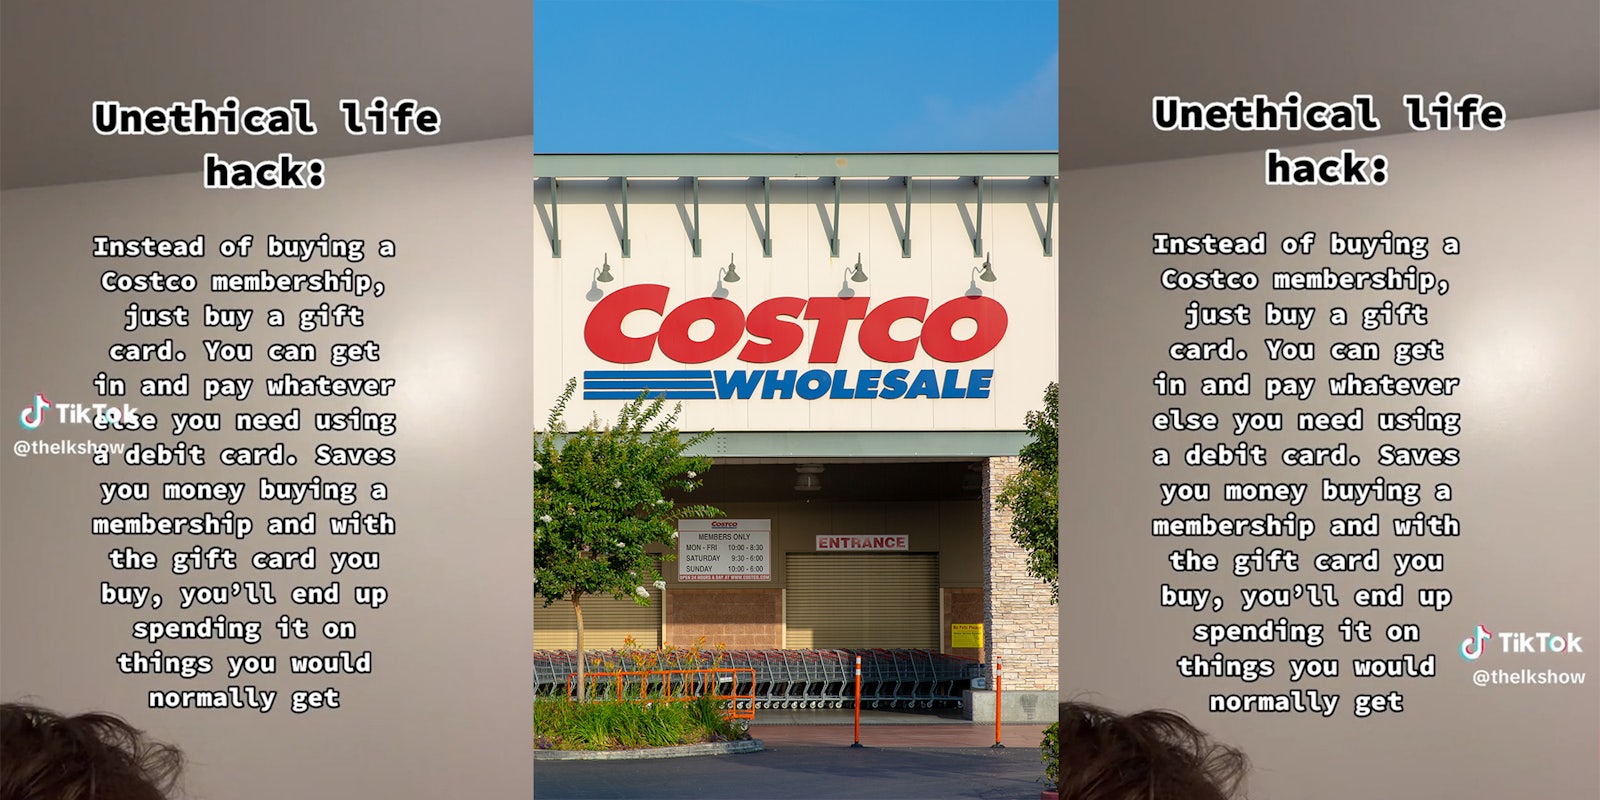 Shopper shares 'unethical life hack' to buy from Costco without membership. But does it work?